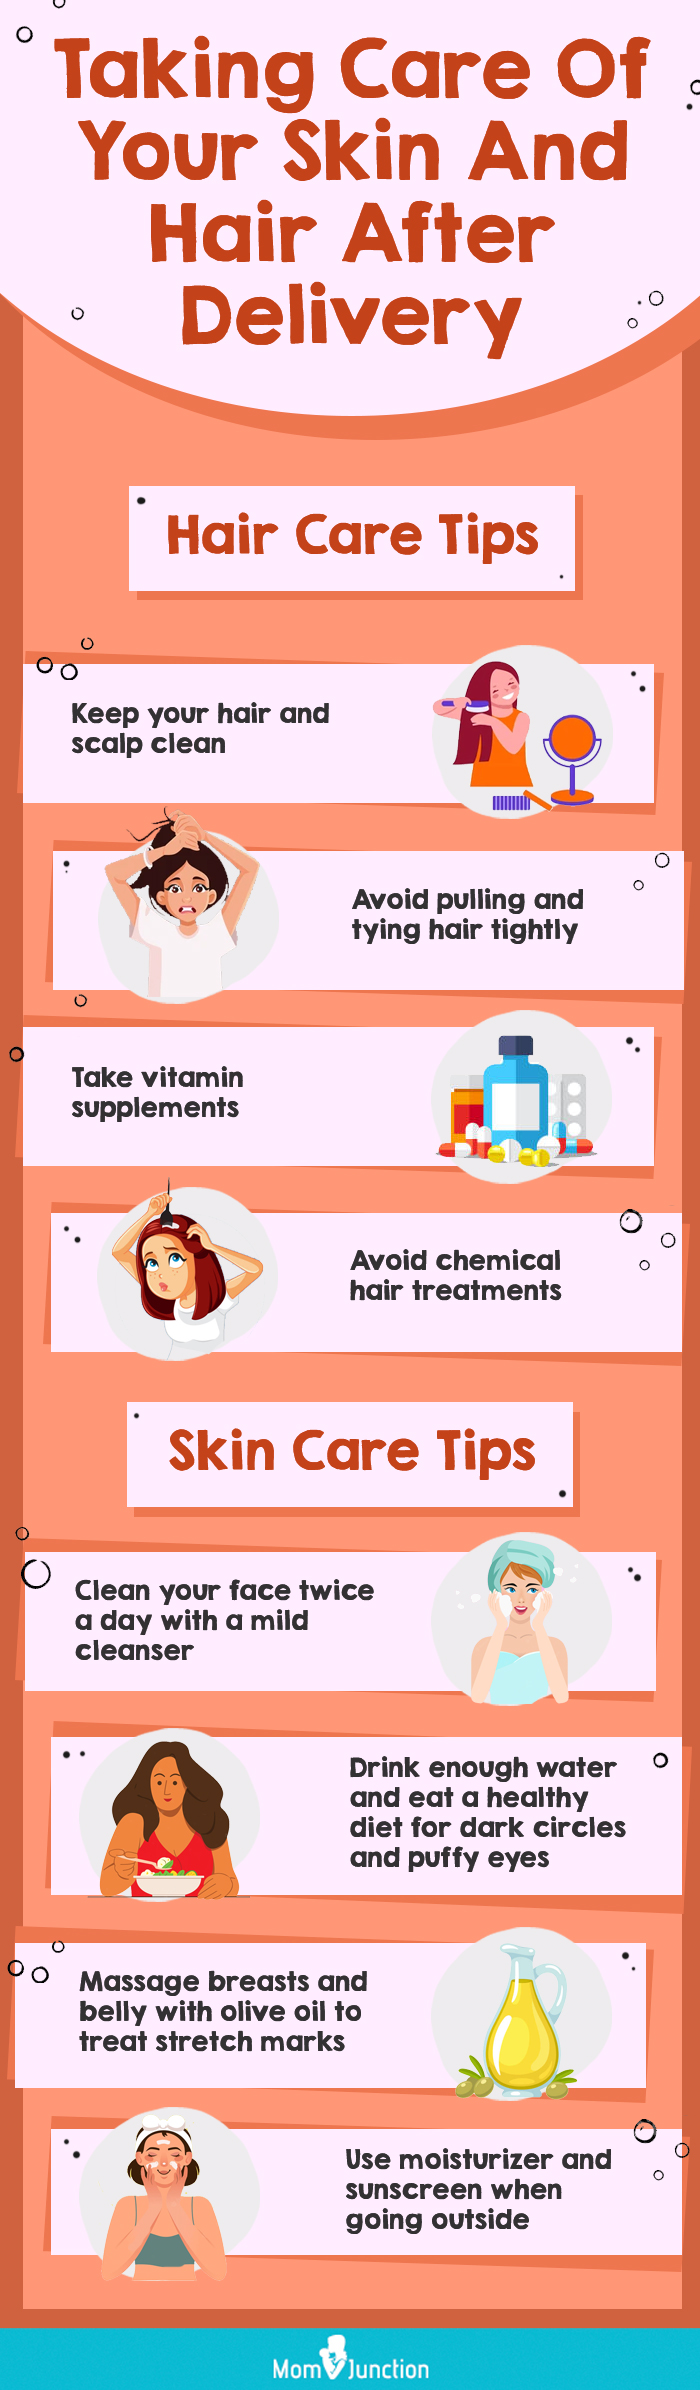 Skin Care Tips For Your Breasts